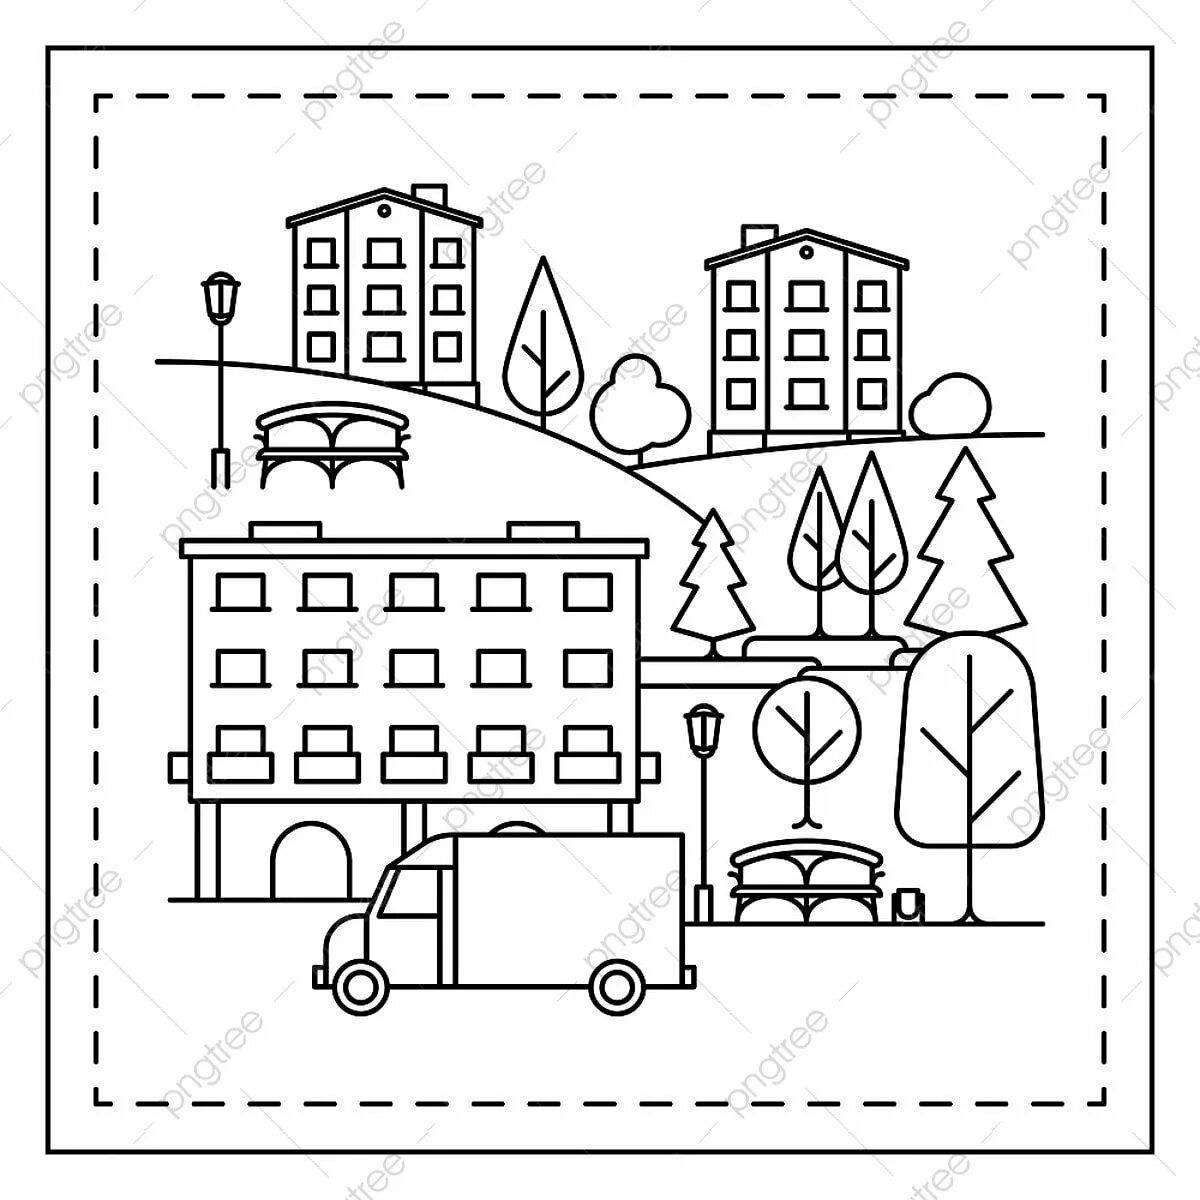 Coloring book dazzling street for kids